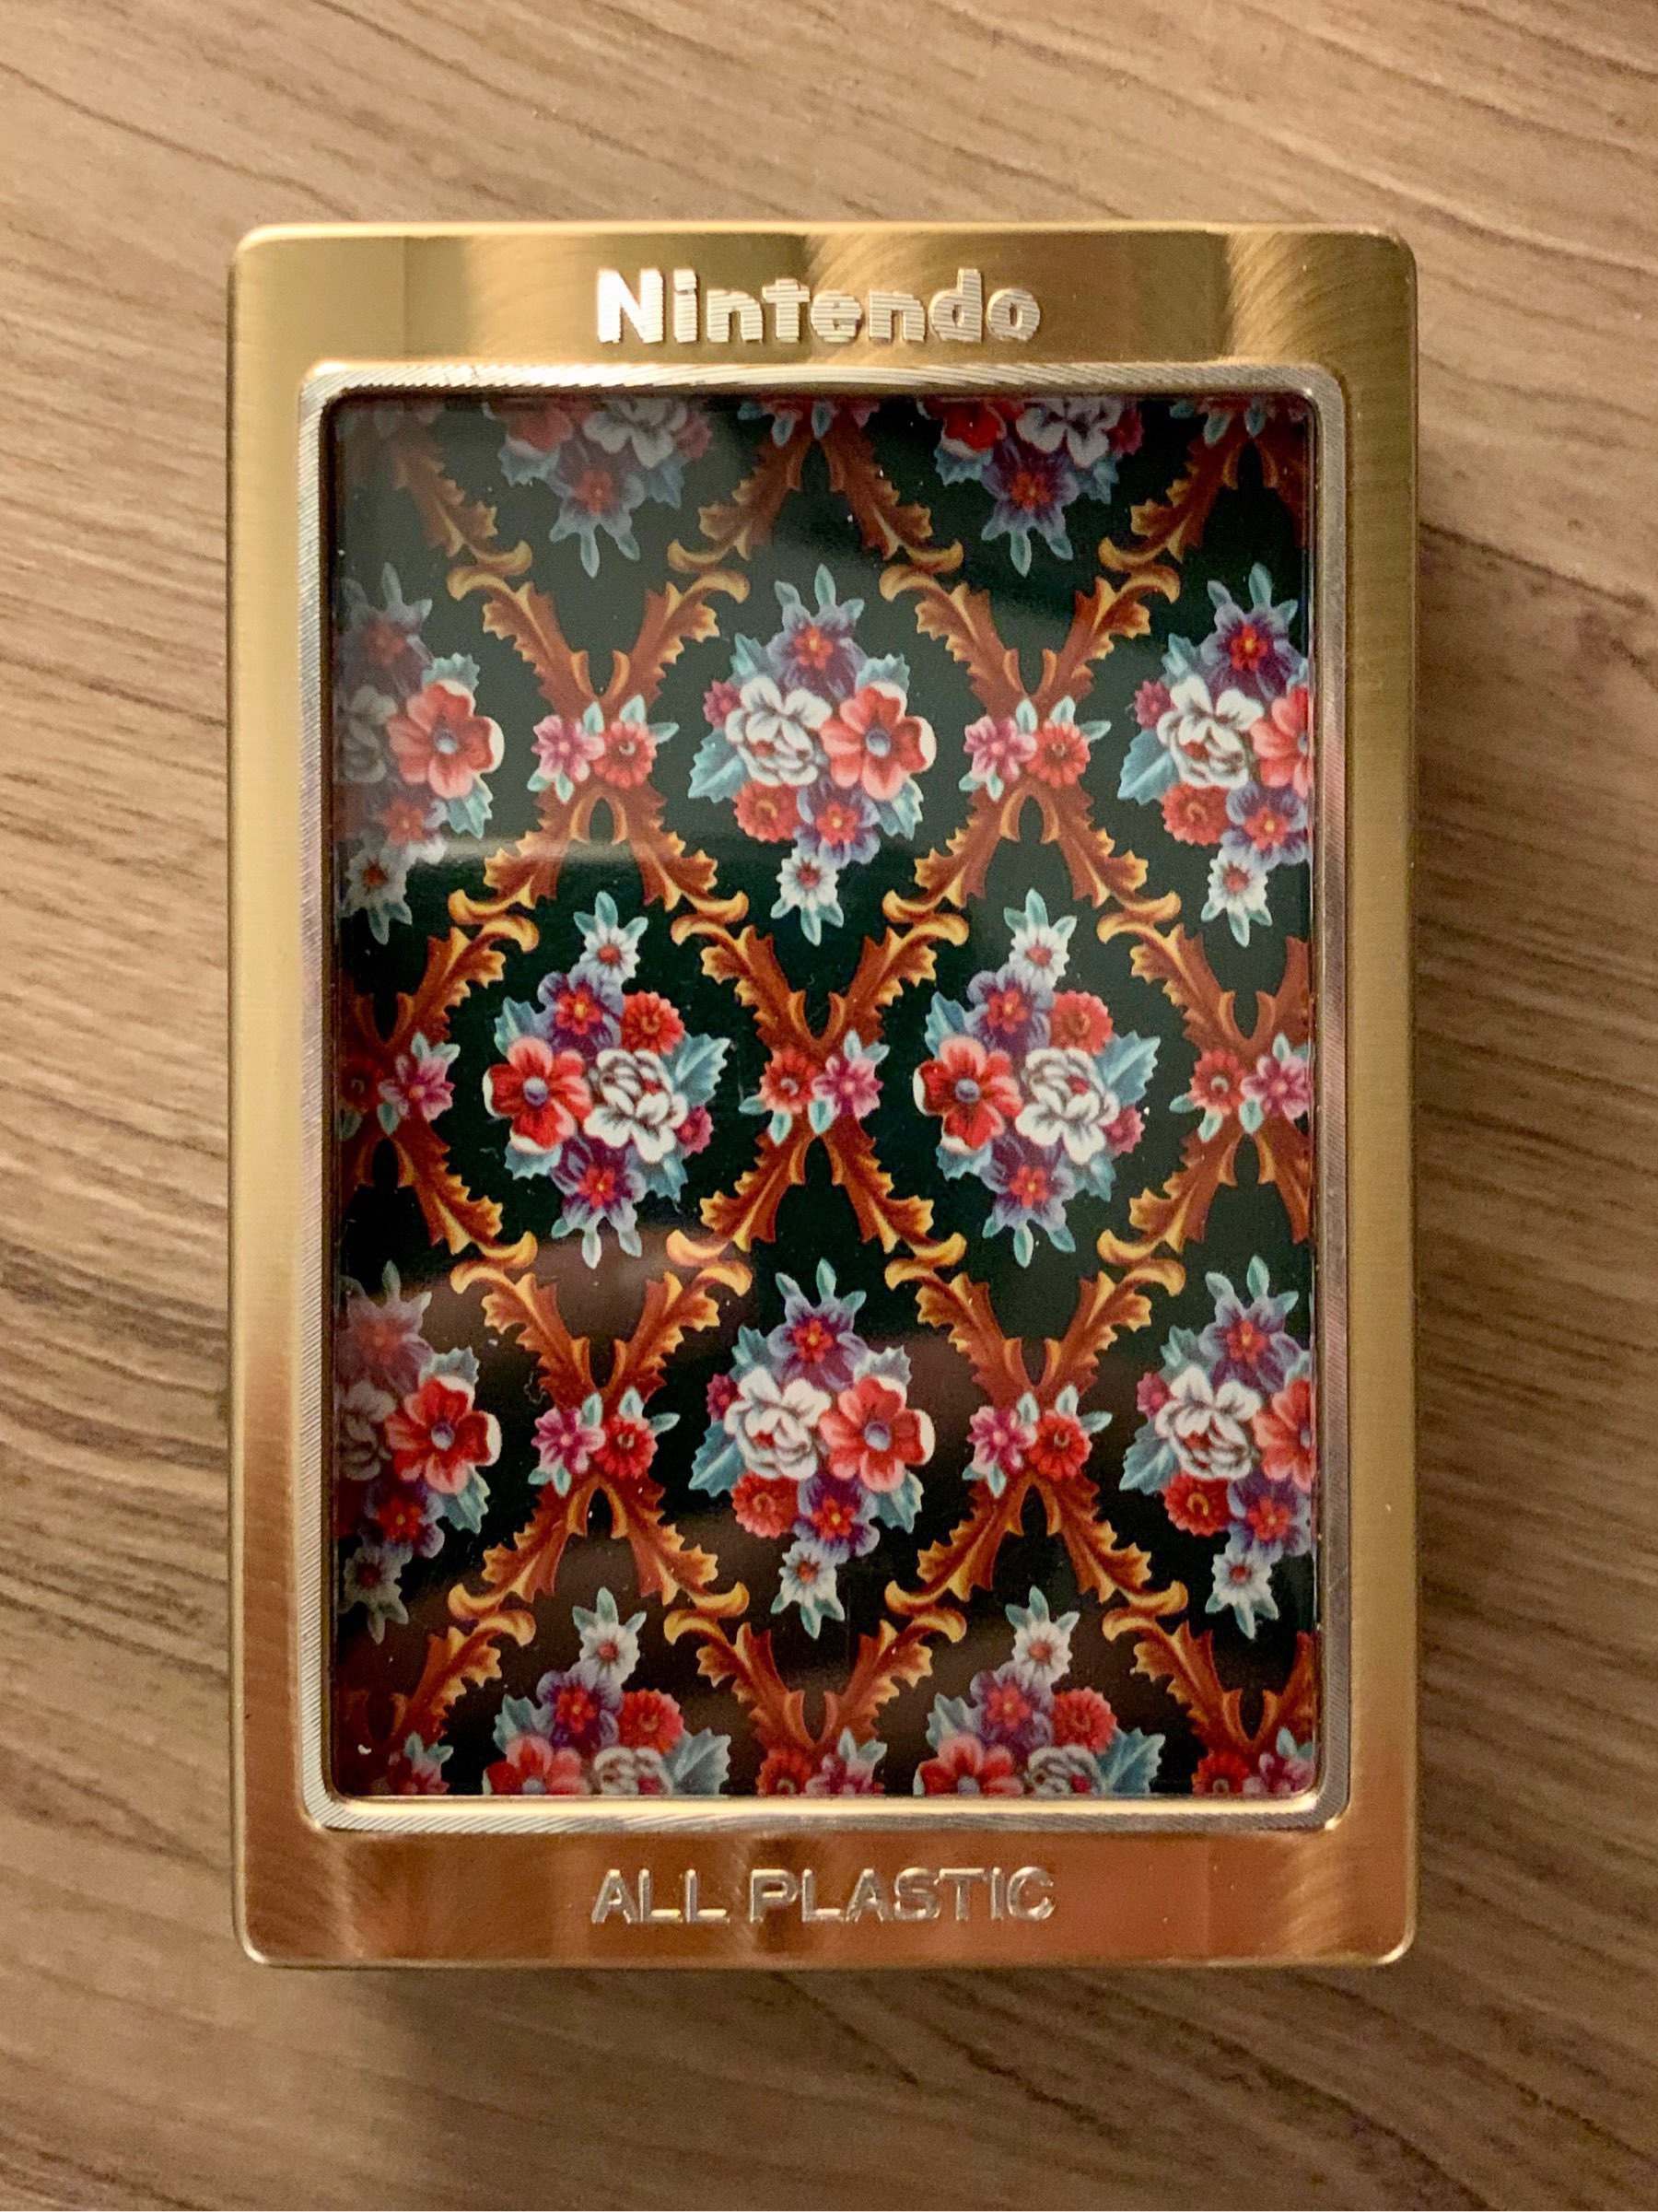 Playing cards in a Nintendo-branded plastic box